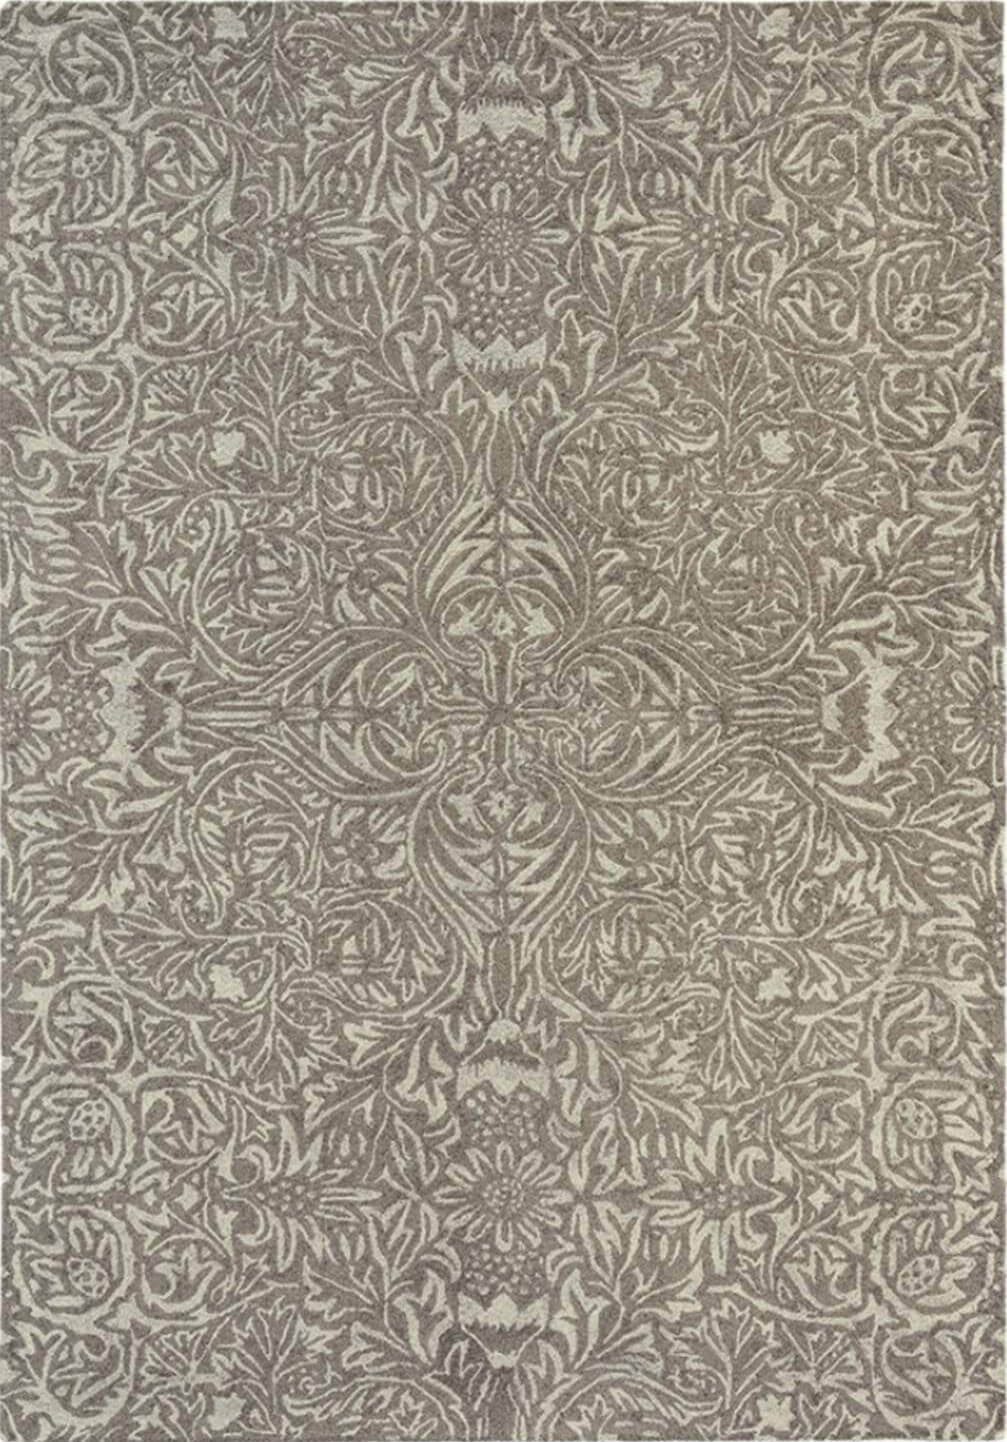 Ceiling Taupe 28501 Rug by Brink & Campman ☞ Size: 140 x 200 cm